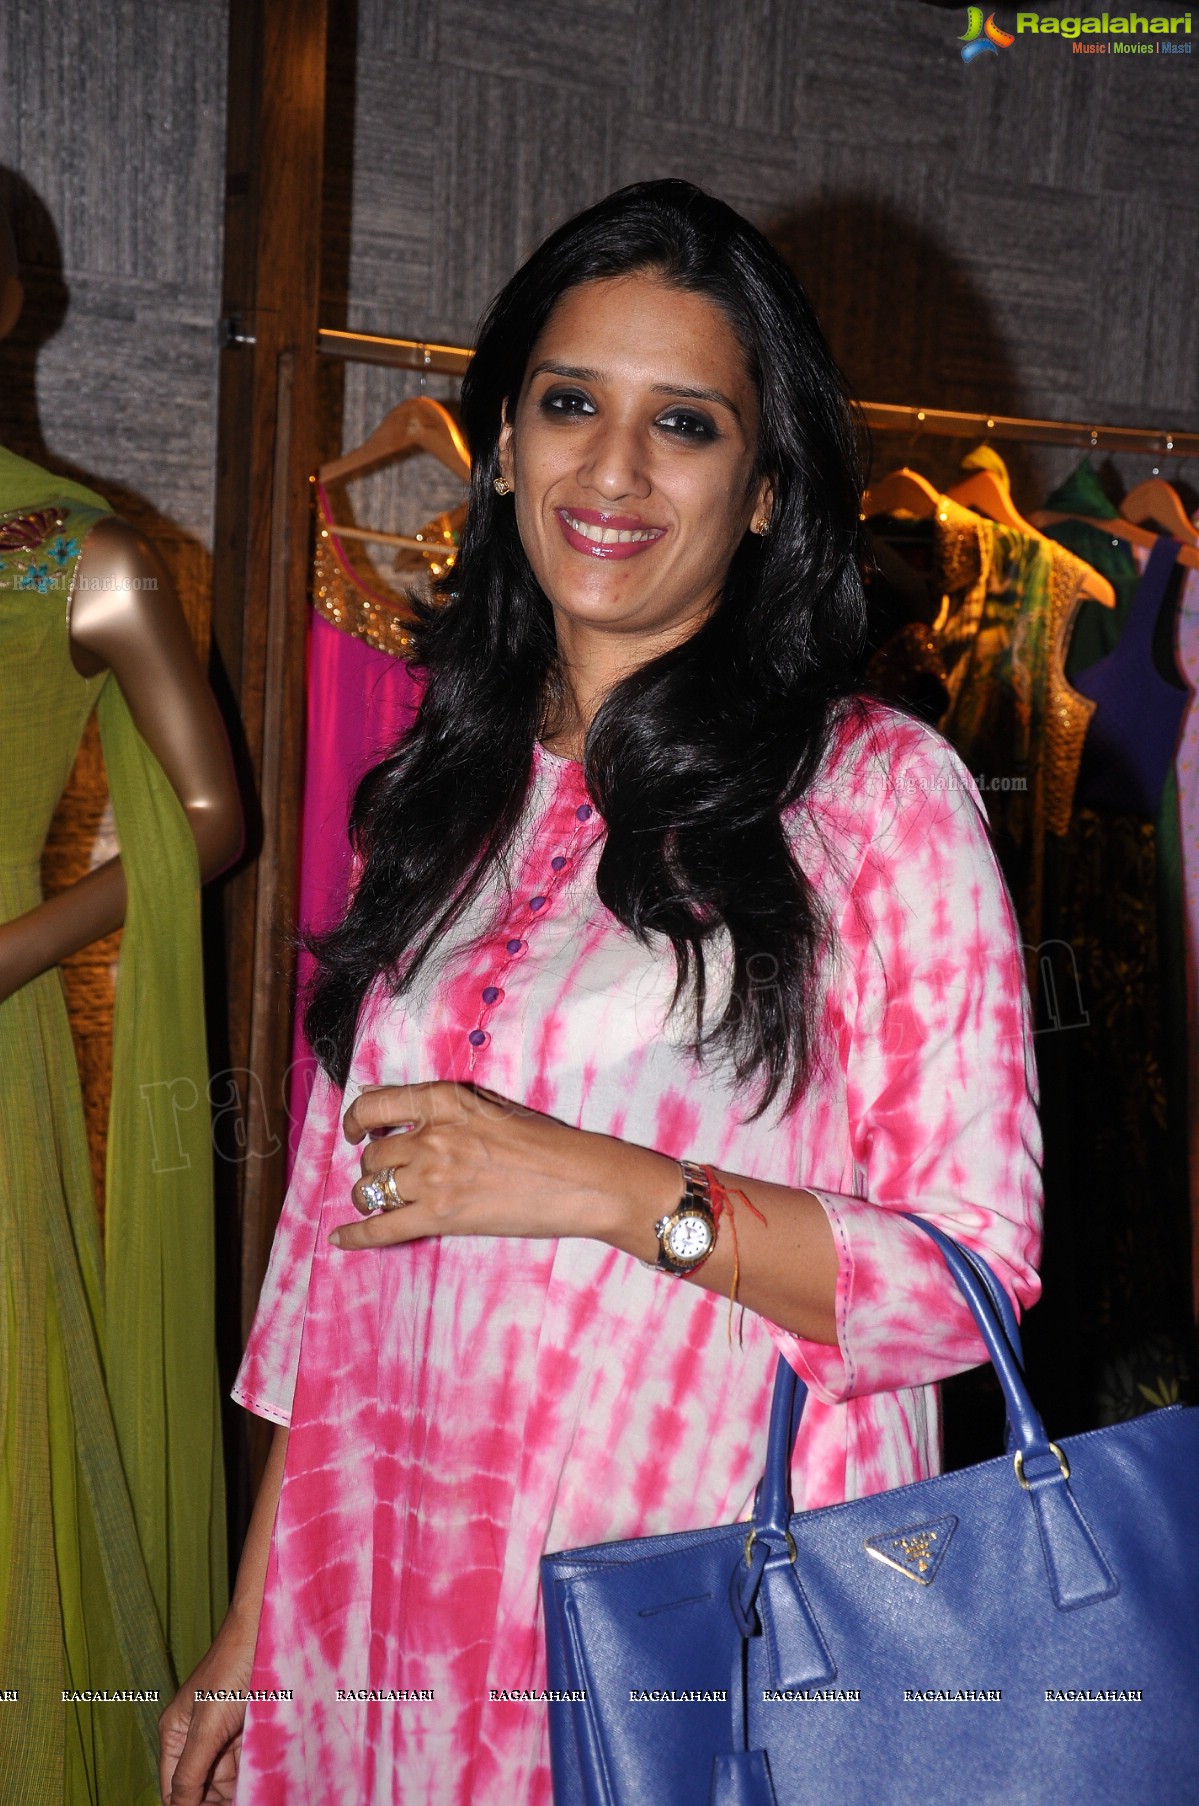 Shilpa Reddy Studio First Anniversary Event at N Asian, Hyderabad